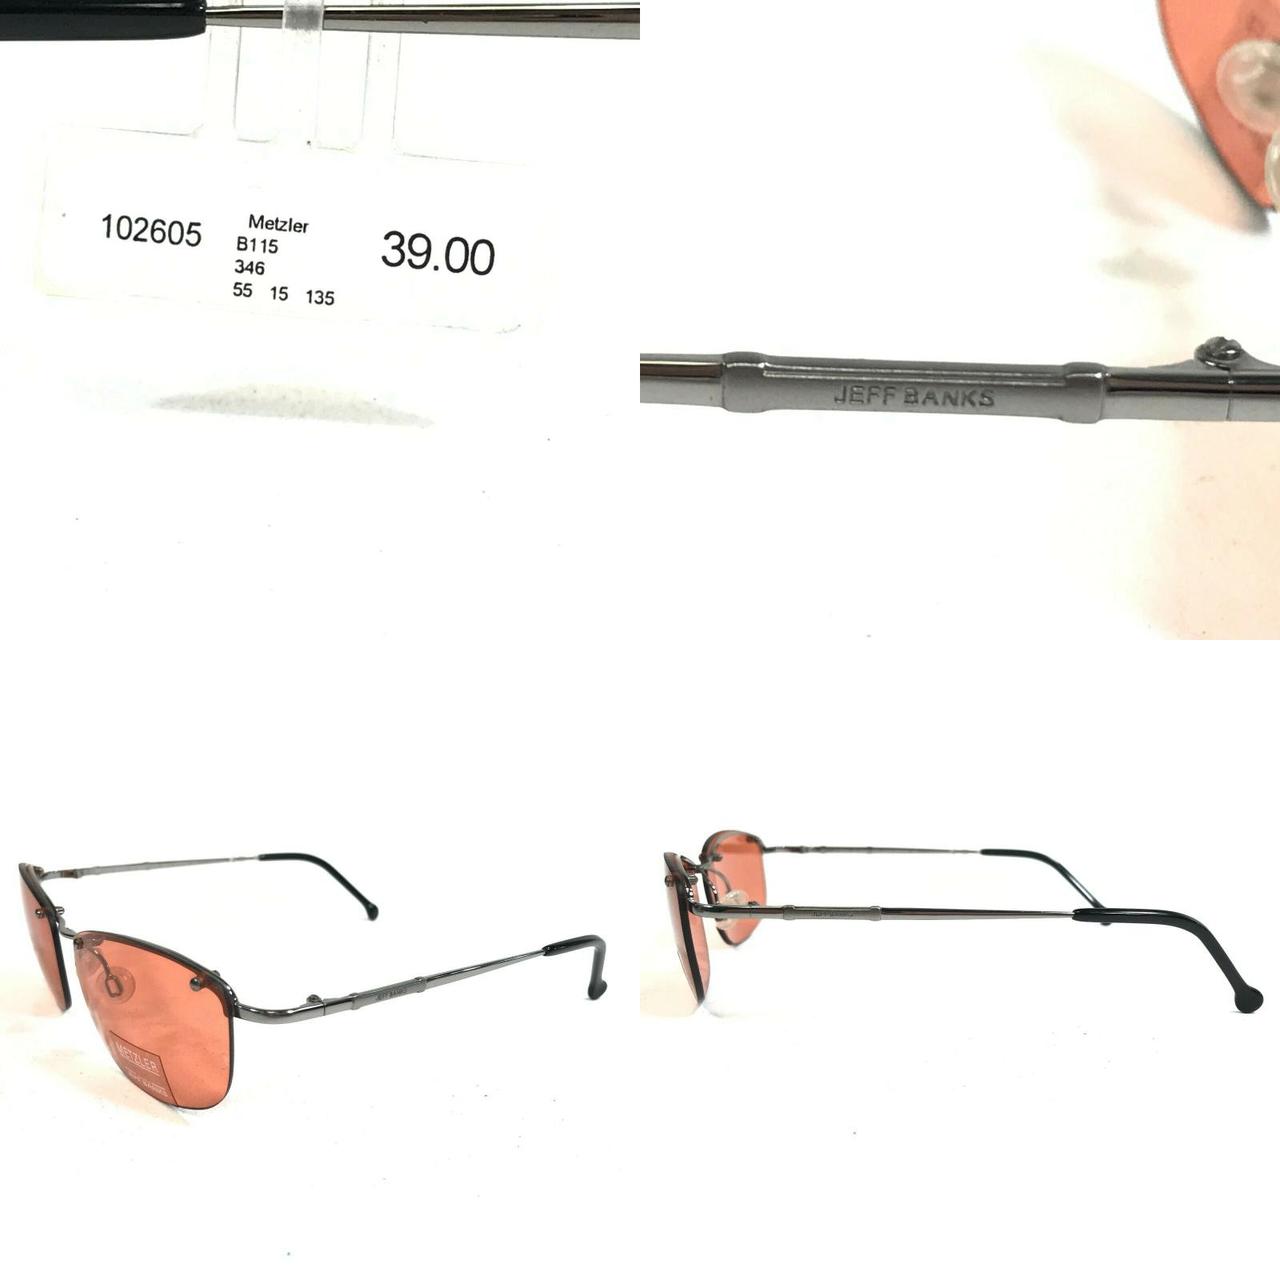 Product Image 4 - Jeff Banks By Metzler Sunglasses